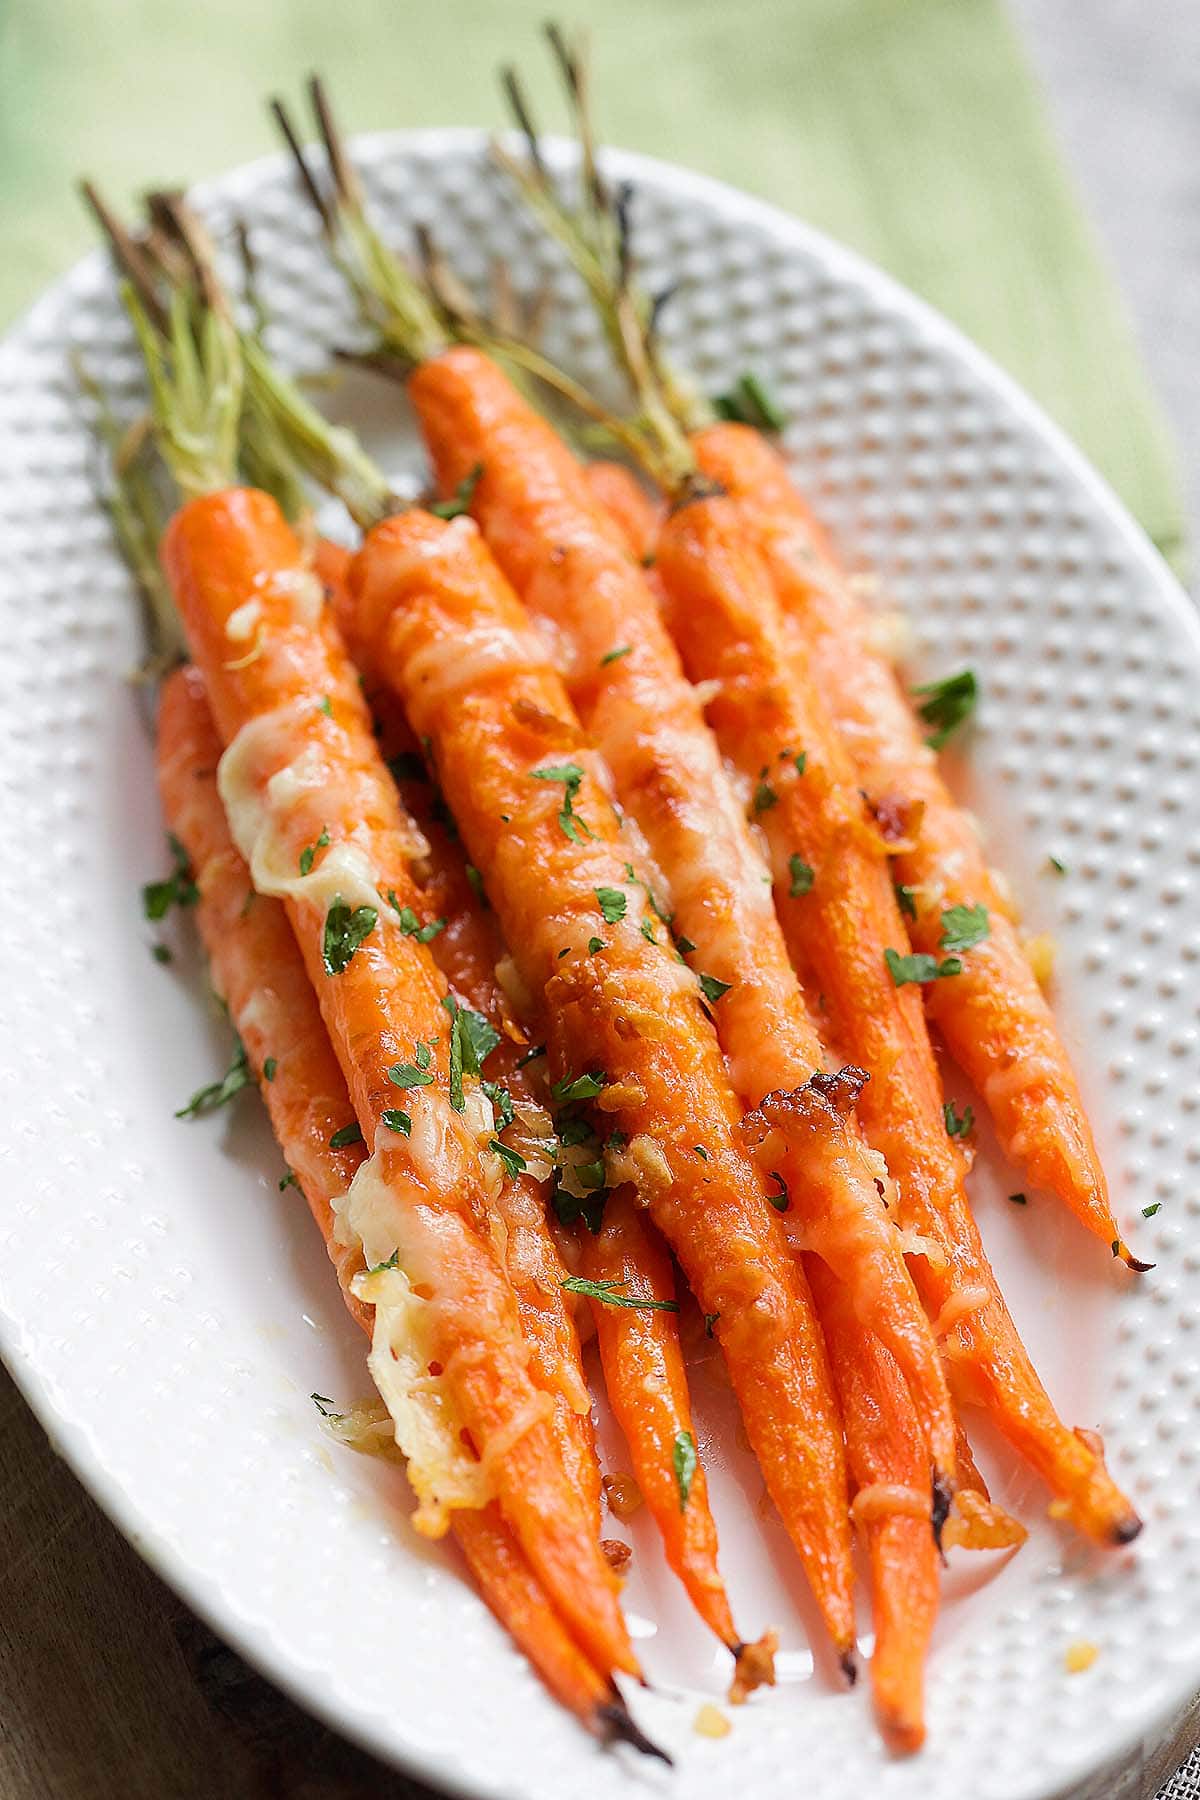 One of the best carrot recipes is garlic parmesan roasted carrots.